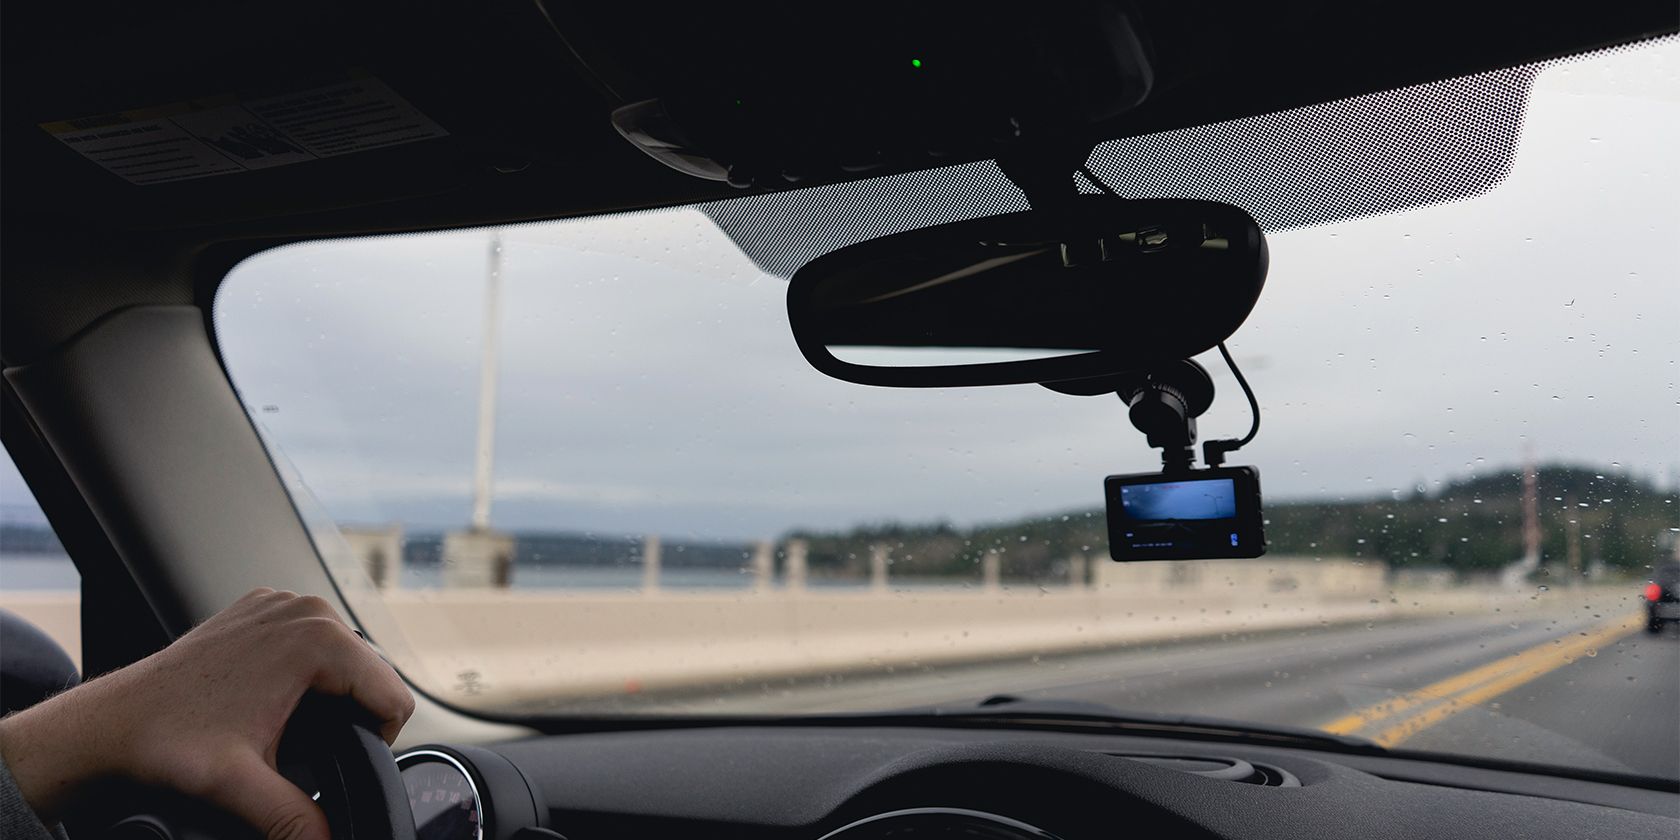 Dashcam buying guide: Don't get the wrong one